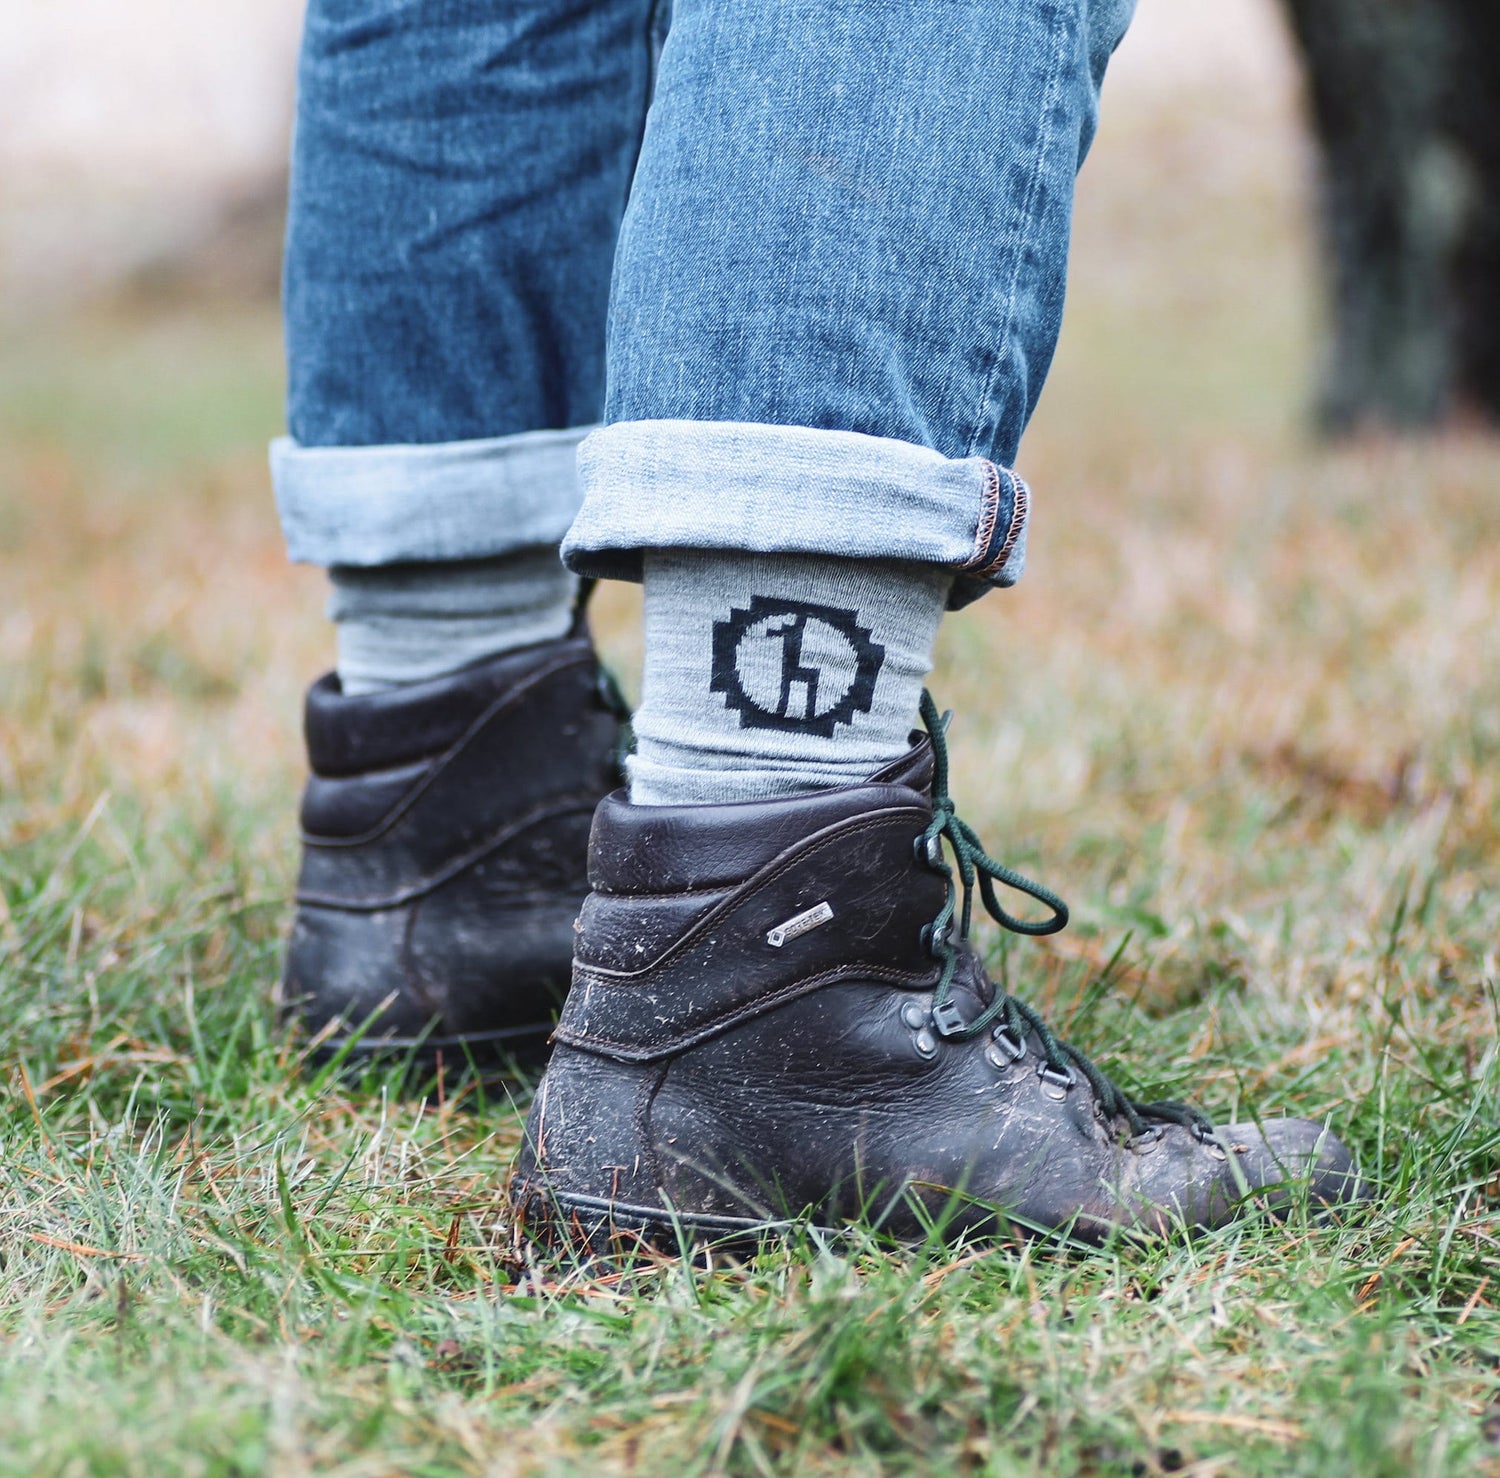 Photo of legs wearing jeans, light grey Paka socks, and leather boots outside on grass